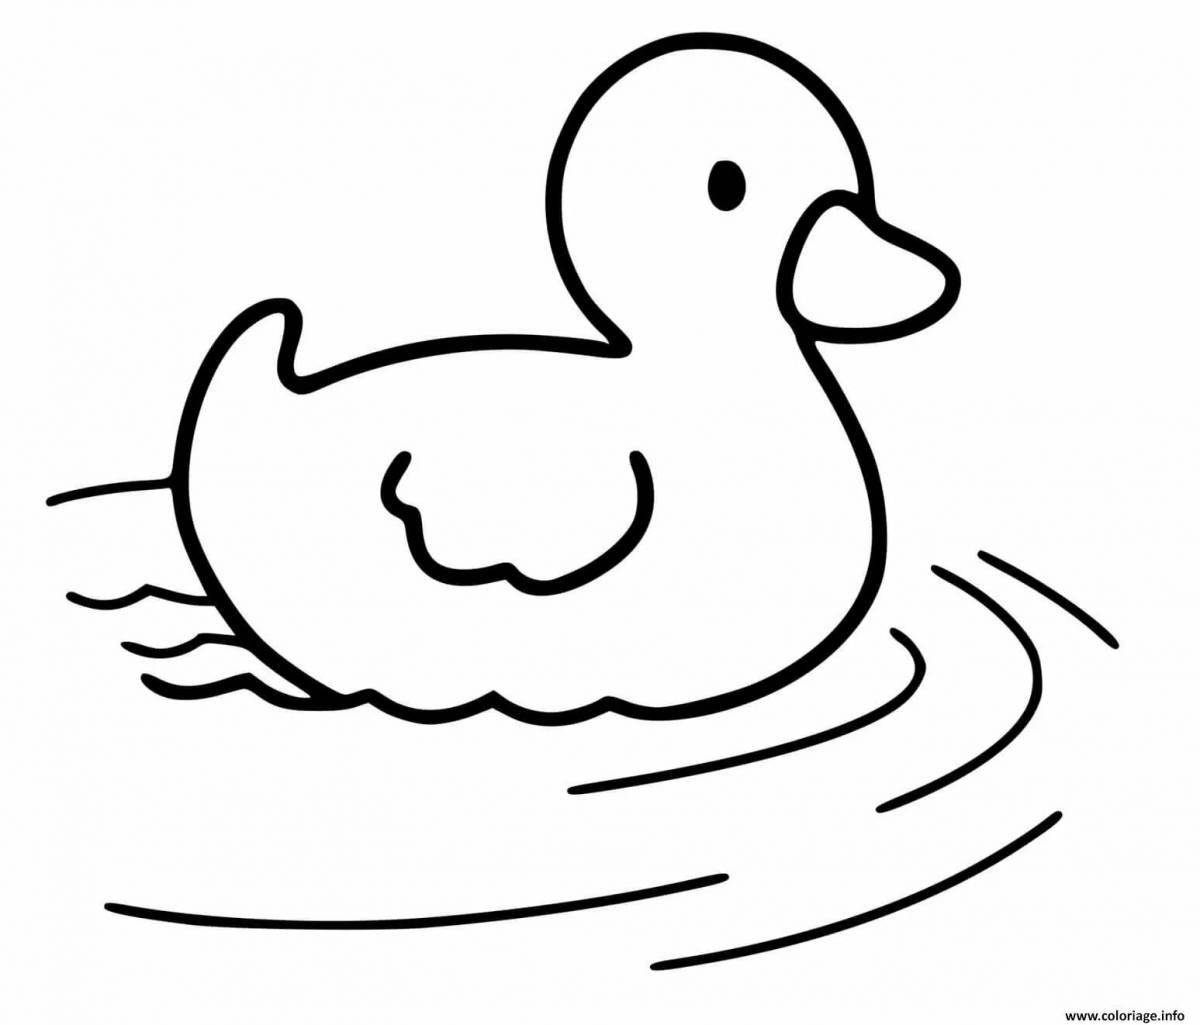 Rampant paper duck coloring page